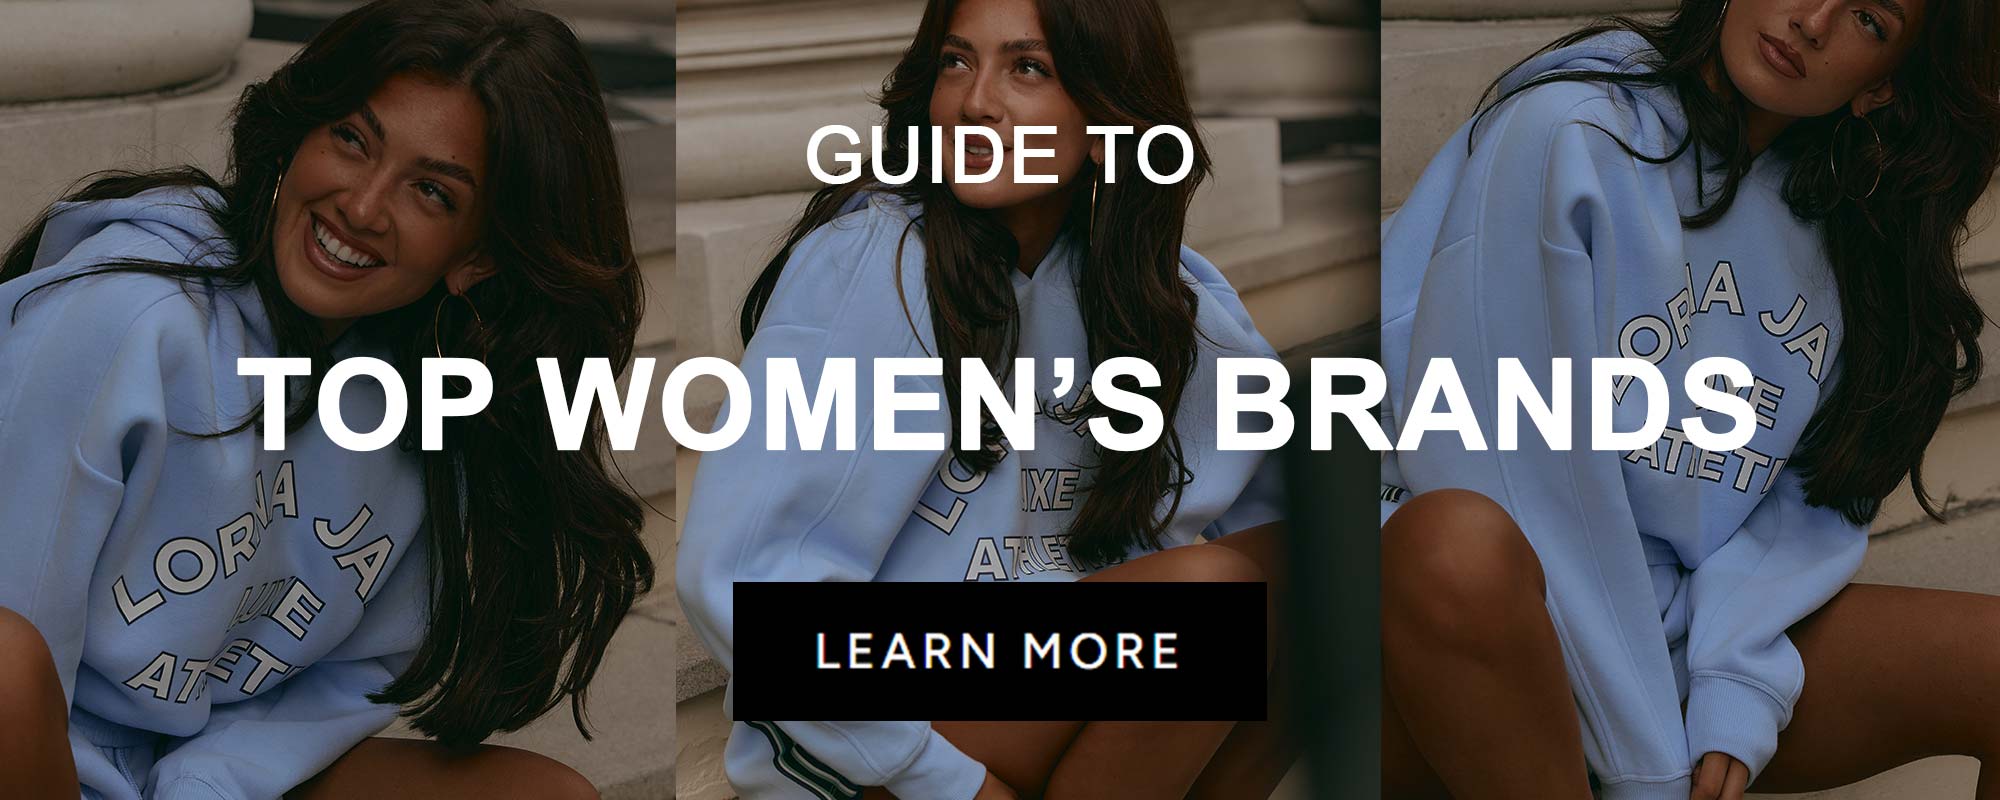 GUIDES_CLOTHES_Top-Womens-brands.jpg